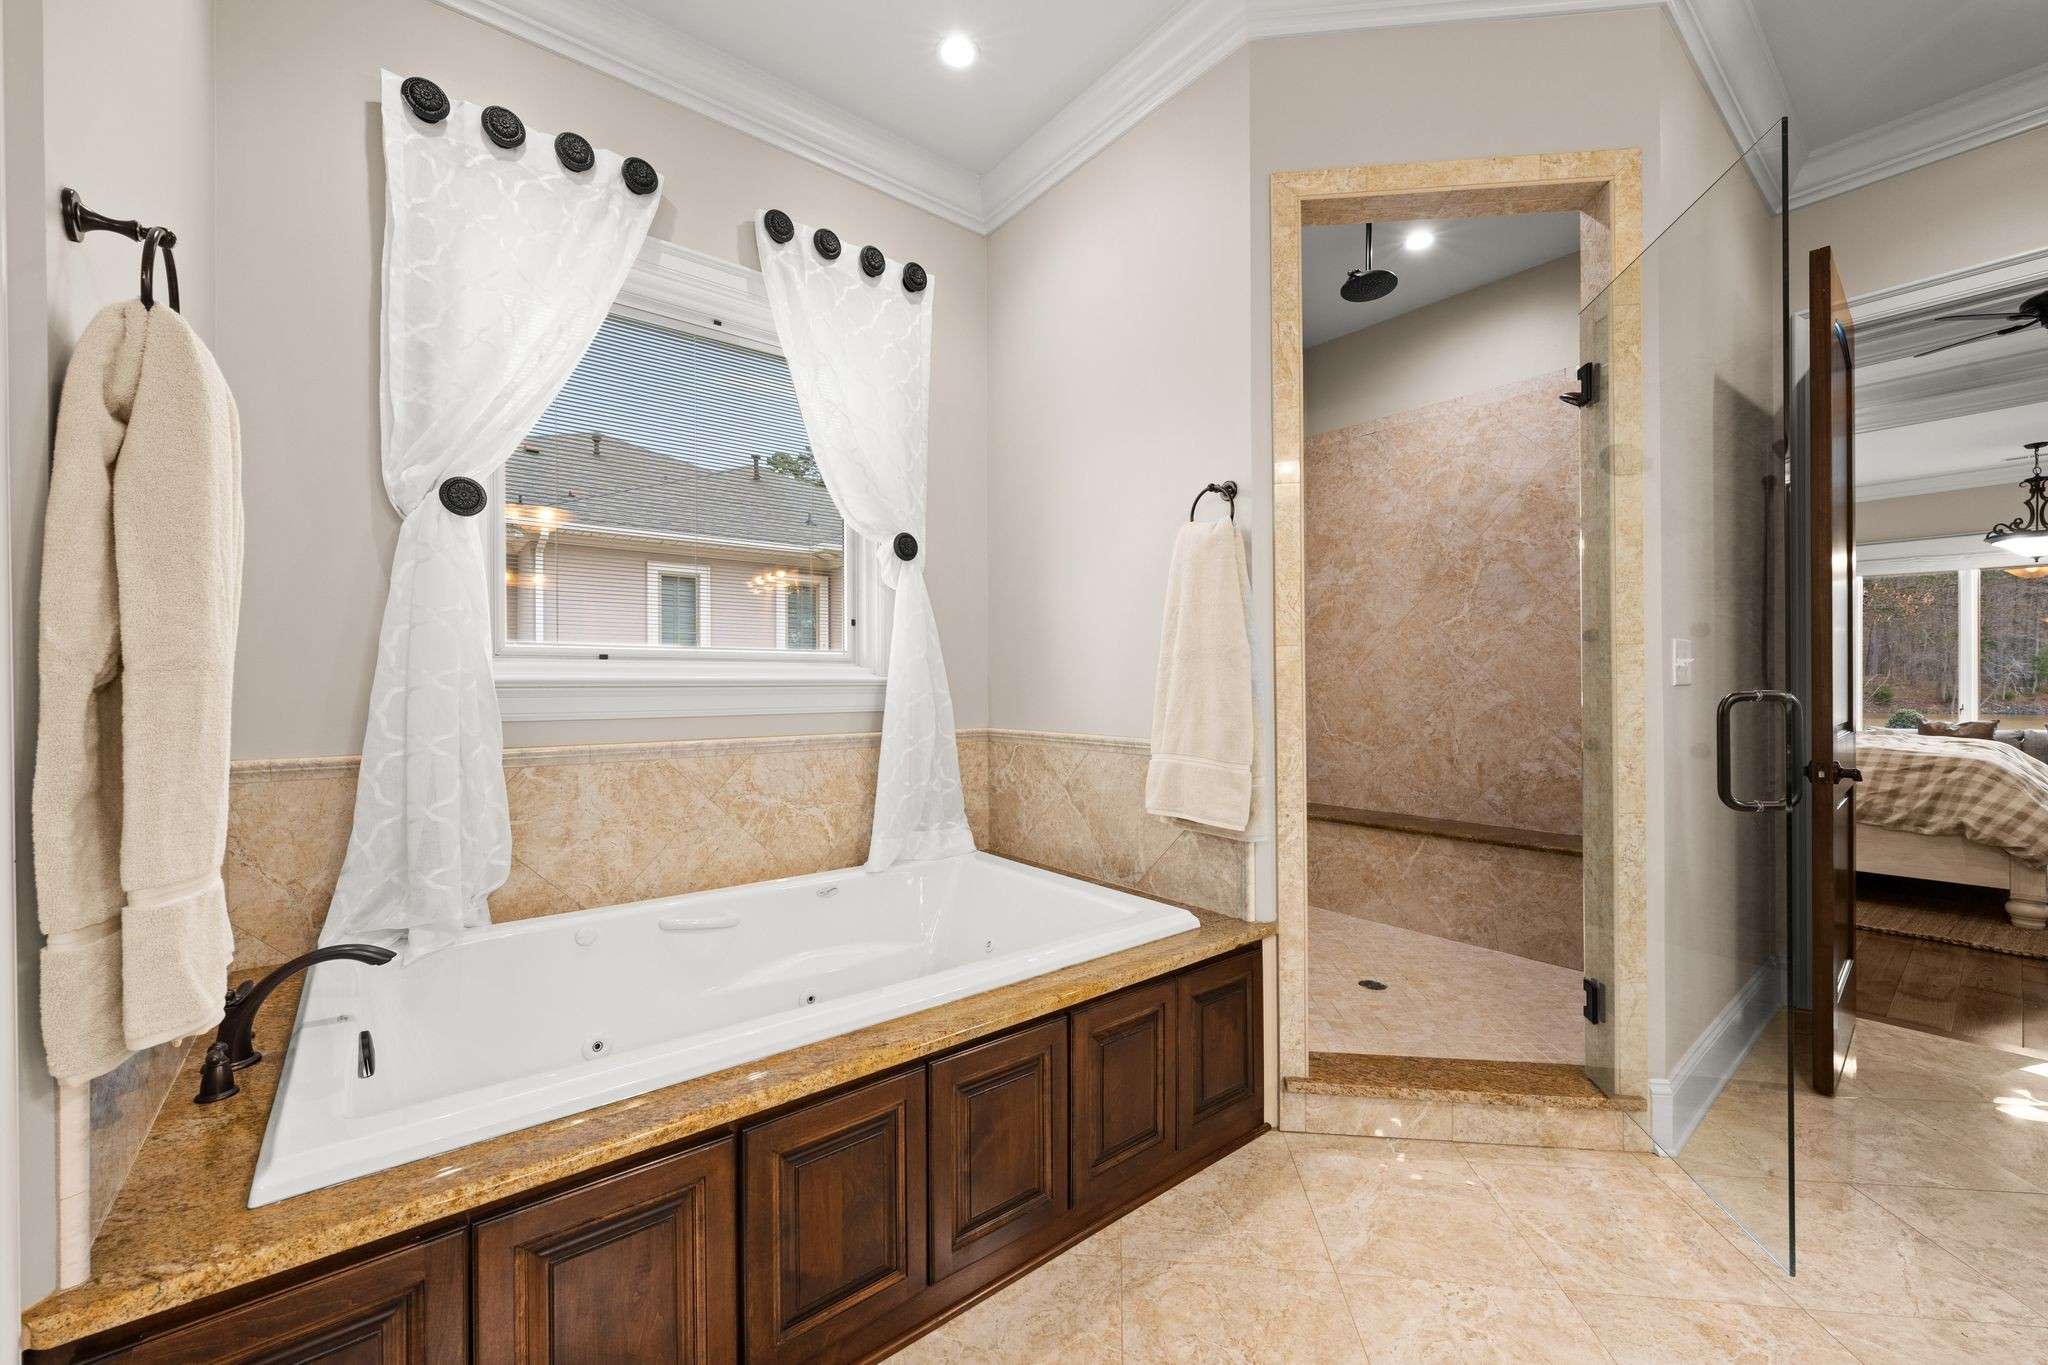 31 of 79. Interior Photo - 846 Armstrong Rd - Additional Photo of Primary Ensuite showing Spa Steam Shower, and Luxury soaking tub.